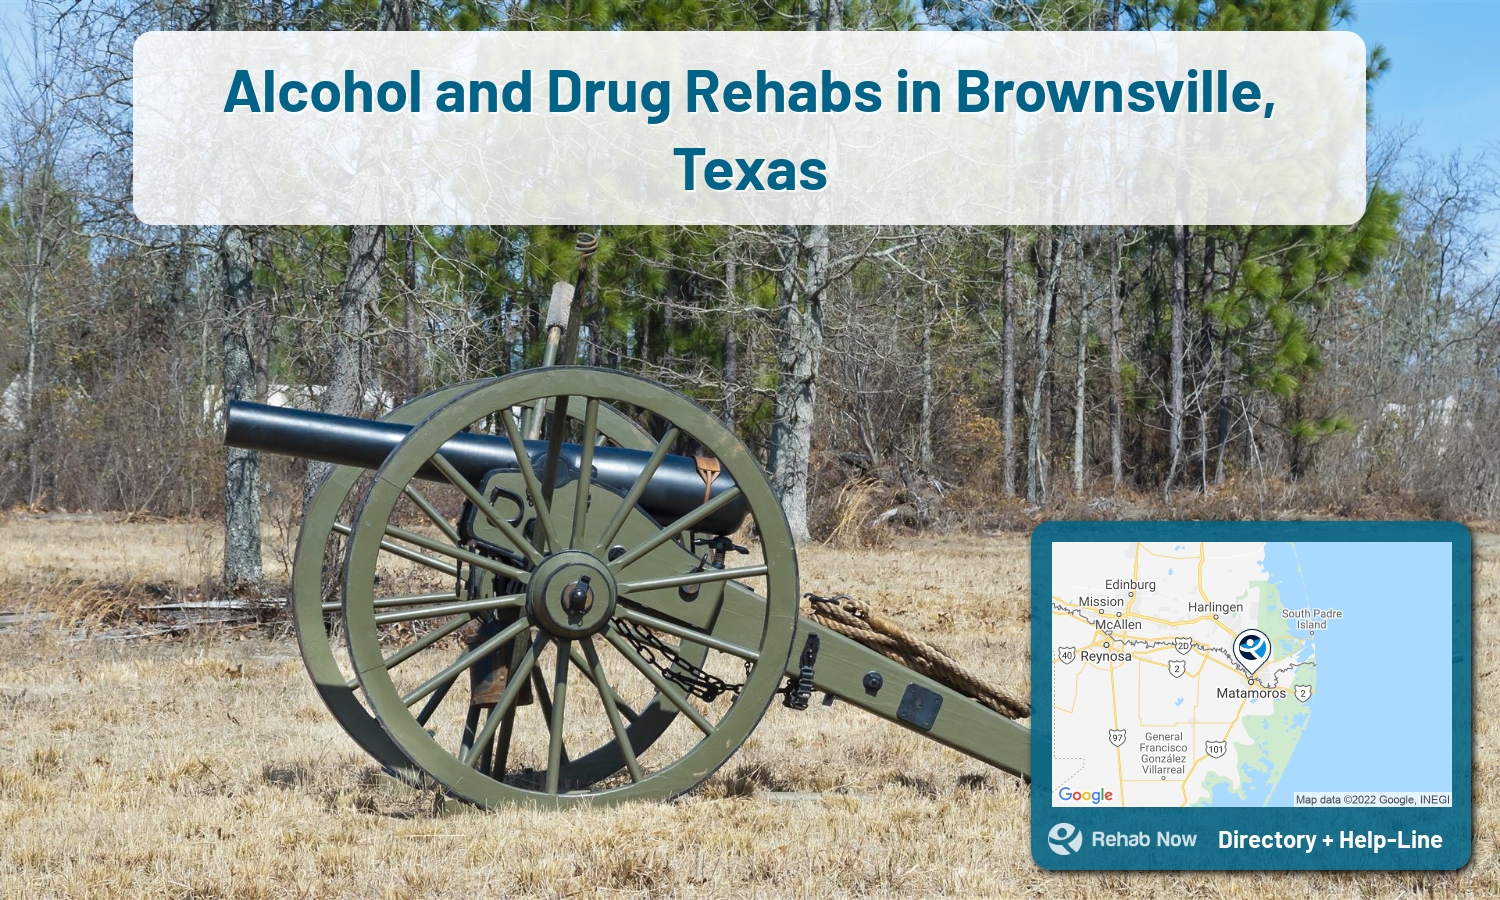 Let our expert counselors help find the best addiction treatment in Brownsville, Texas now with a free call to our hotline.